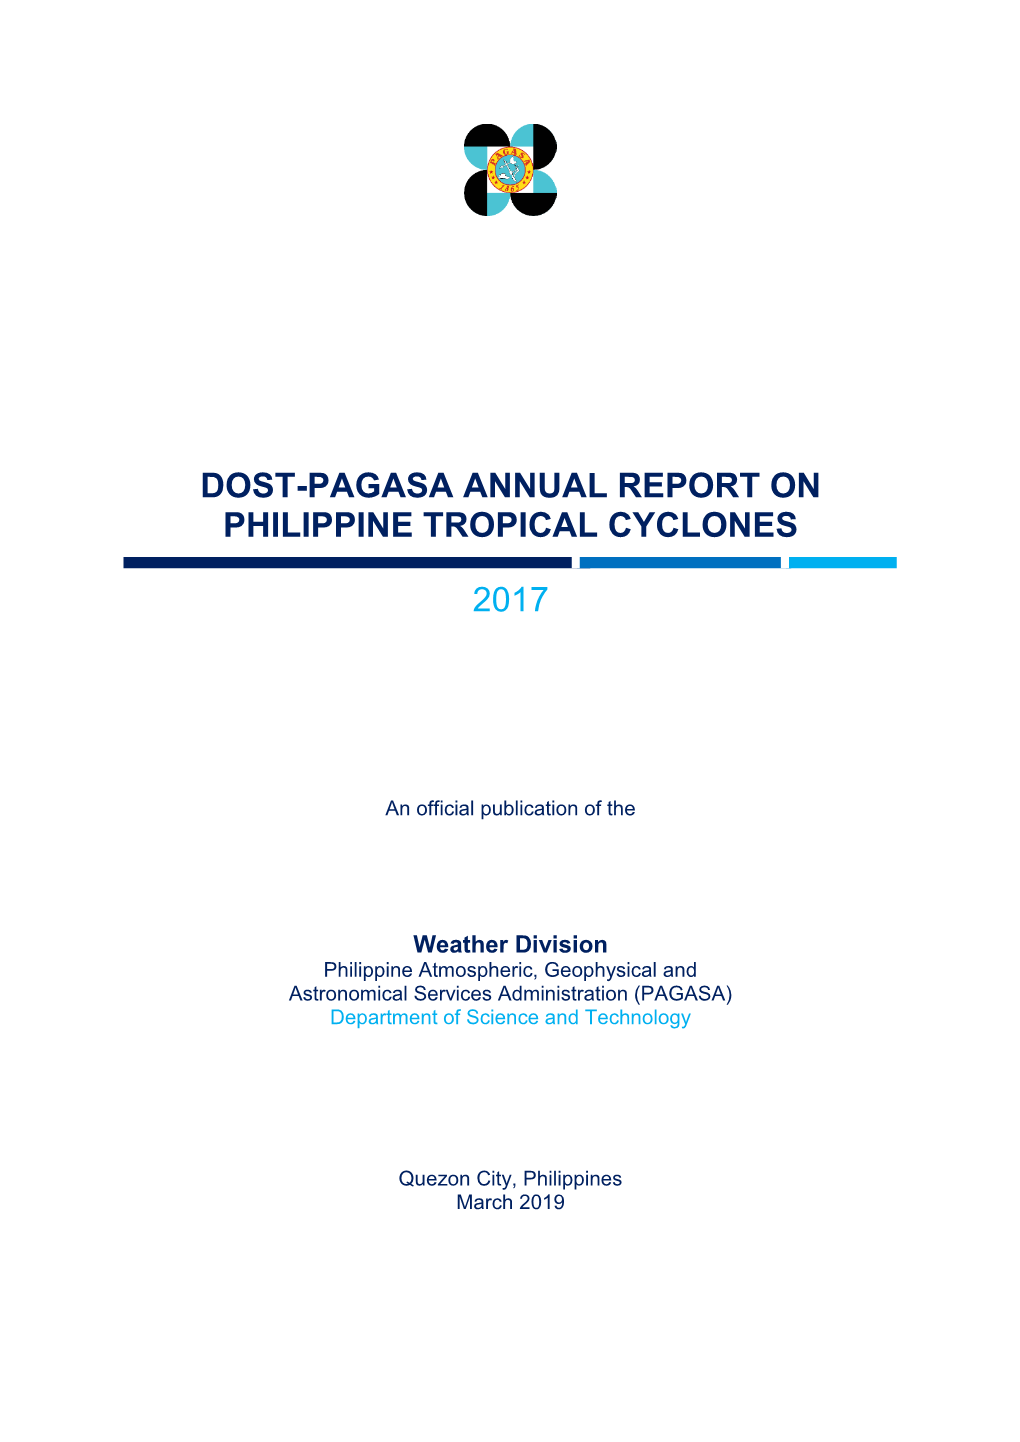 Dost-Pagasa Annual Report on Philippine Tropical Cyclones 2017